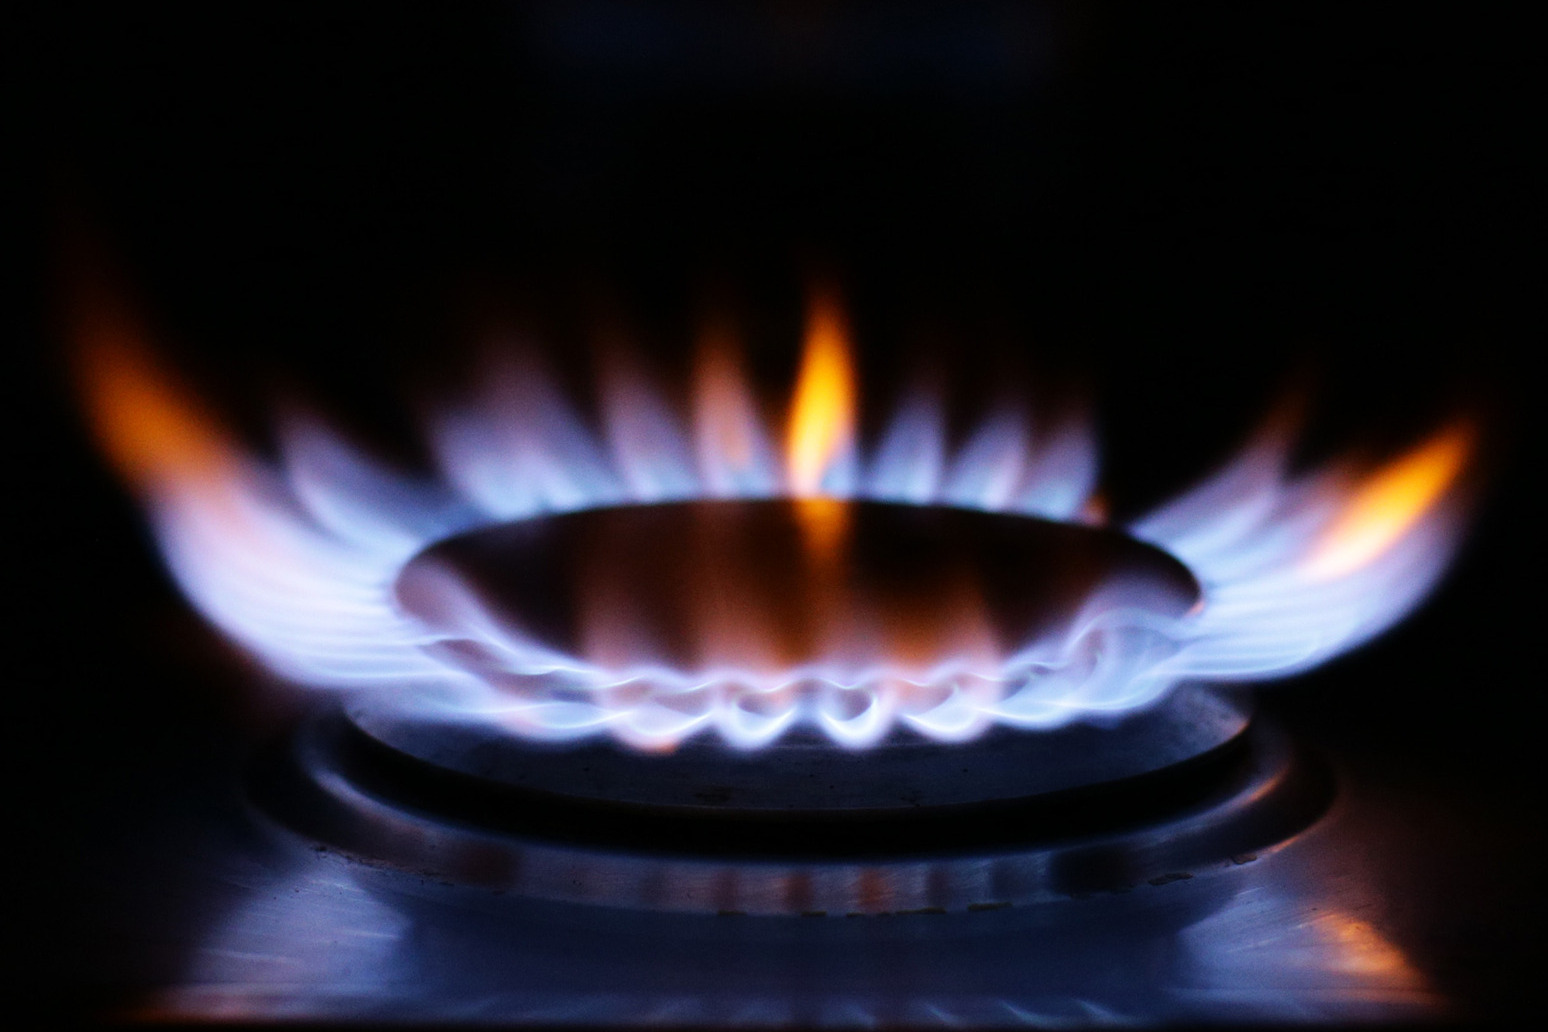 12 million households now spending more than 10% of income on energy bills 